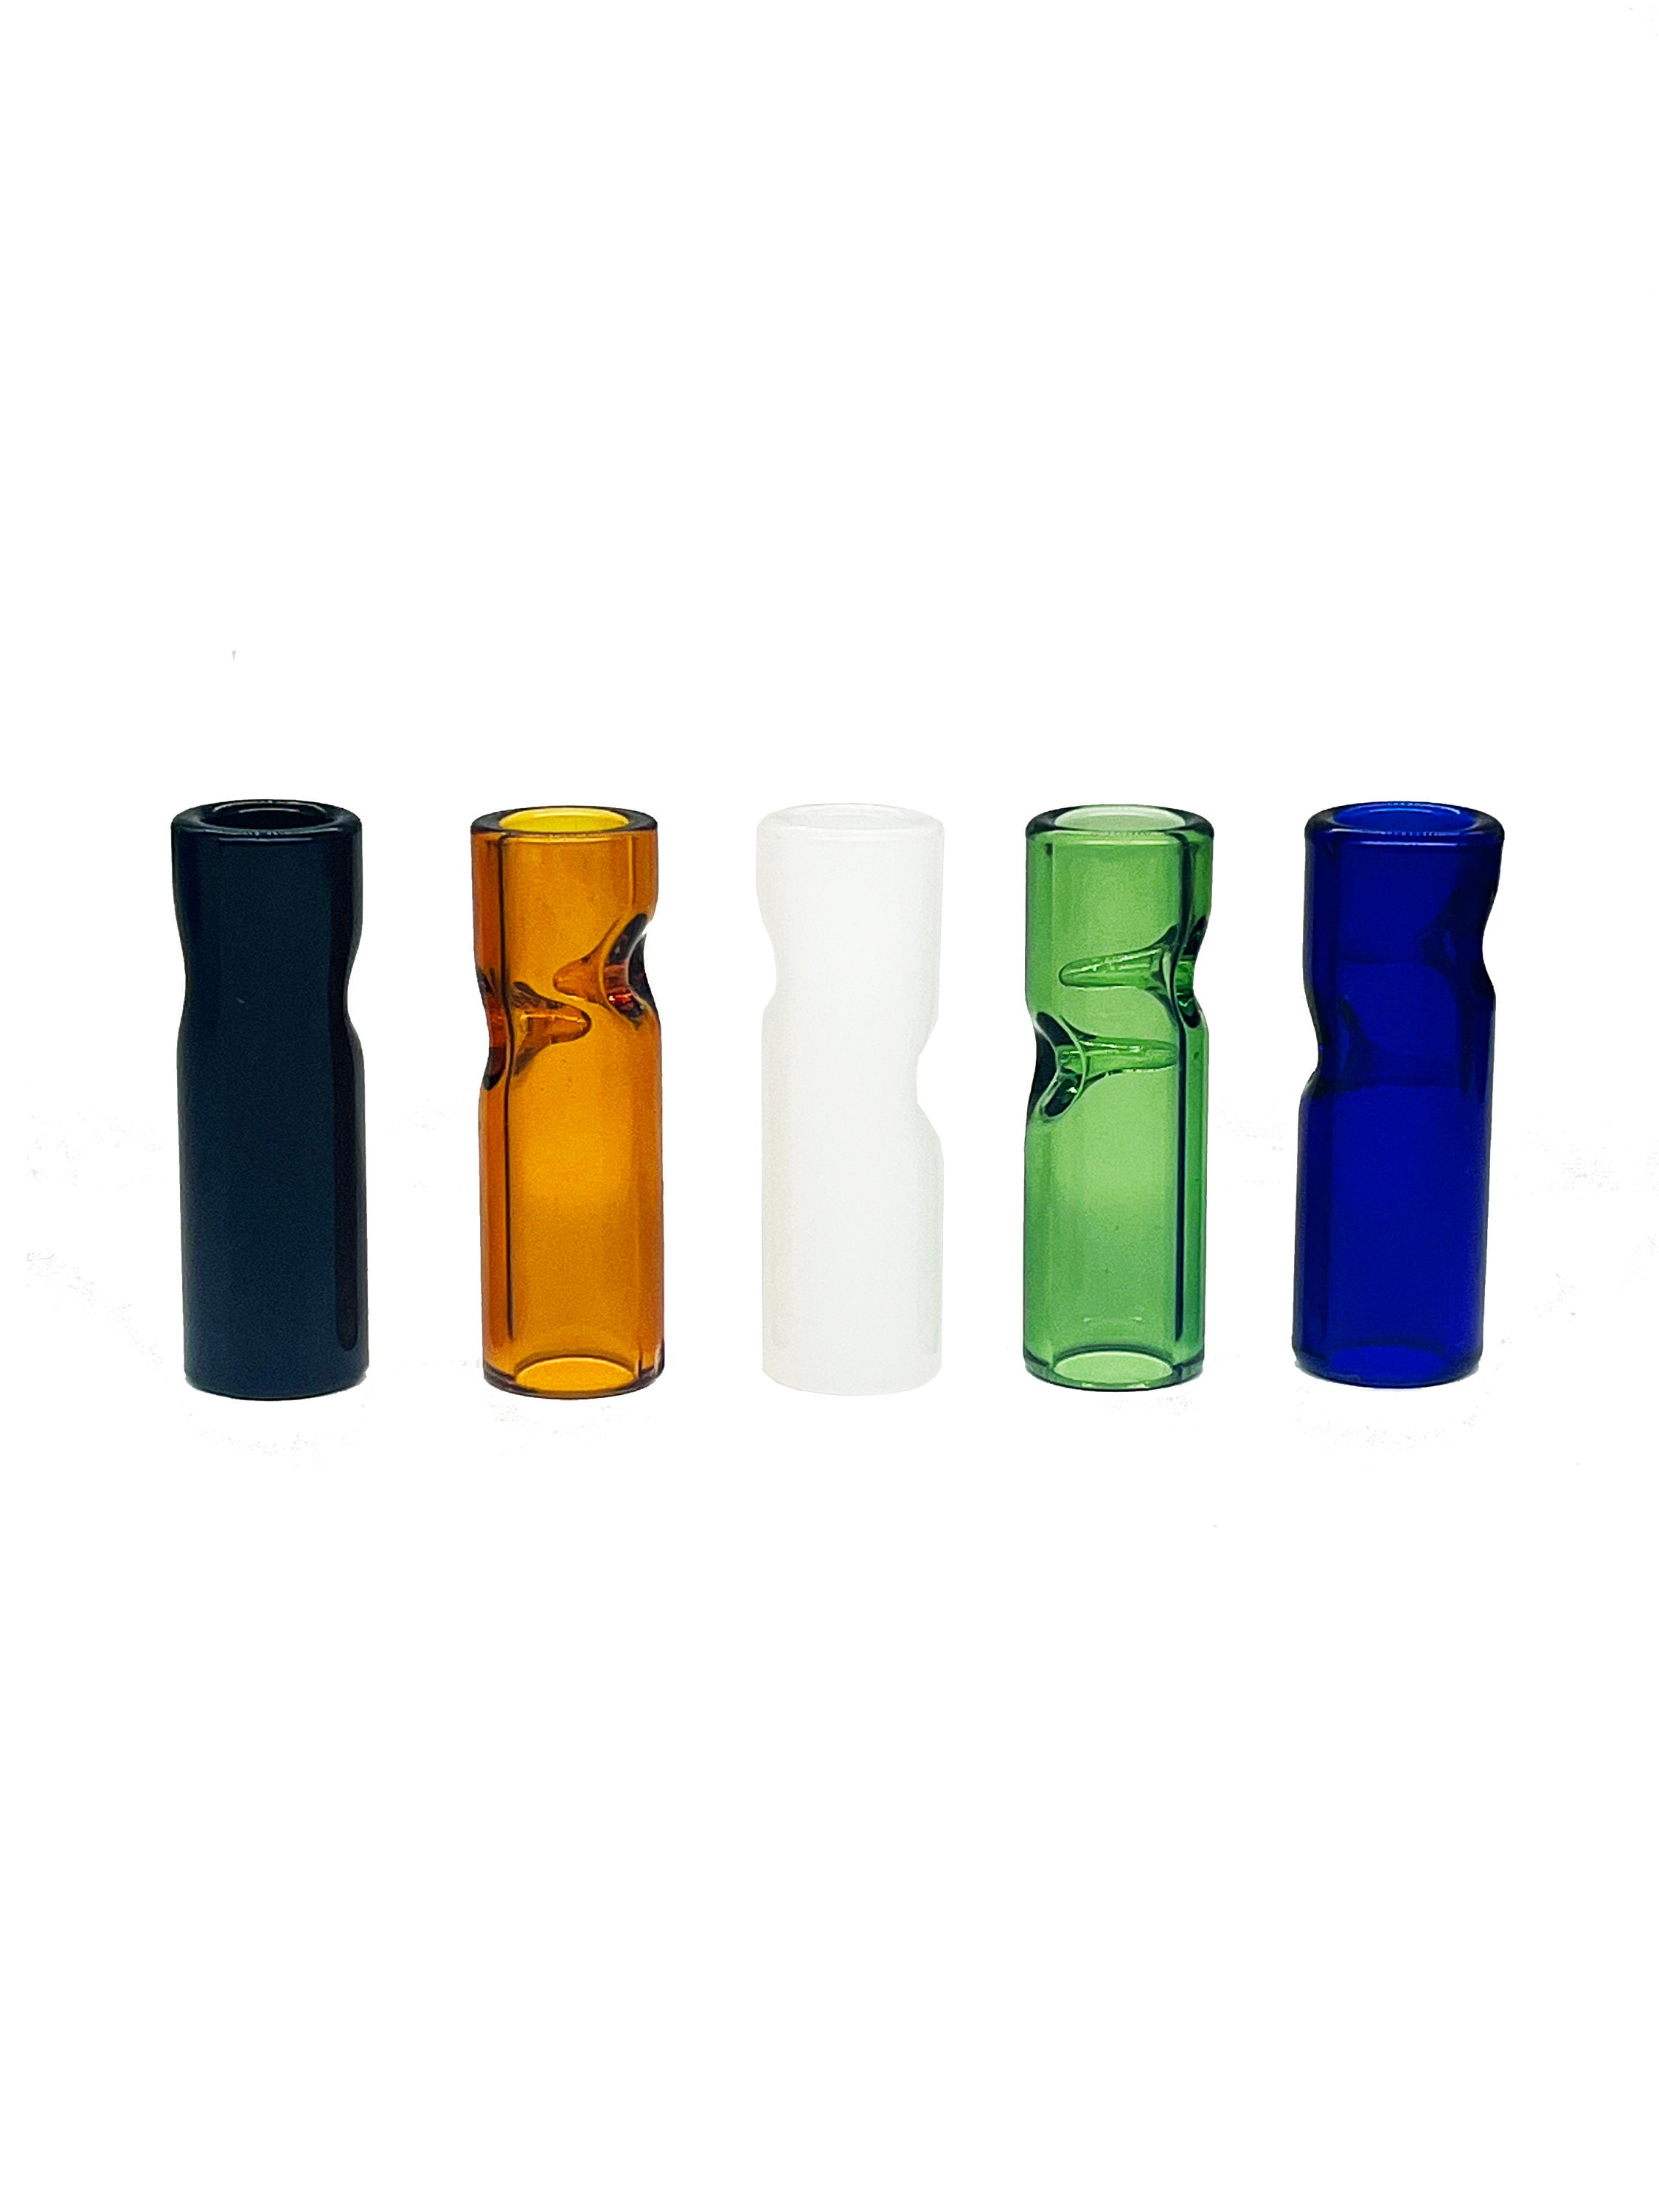 Brand: GlassGuard Type: Snake Filter Specs: Euro/US 2021 Bestseller,  Cigarette Pot Keywords: Glass Pipe, Filter Tip, Smoking Accessory Key  Points: Easy To Use, Reusable, Eco Friendly Main Features: Unique Shape,  Smooth Hits